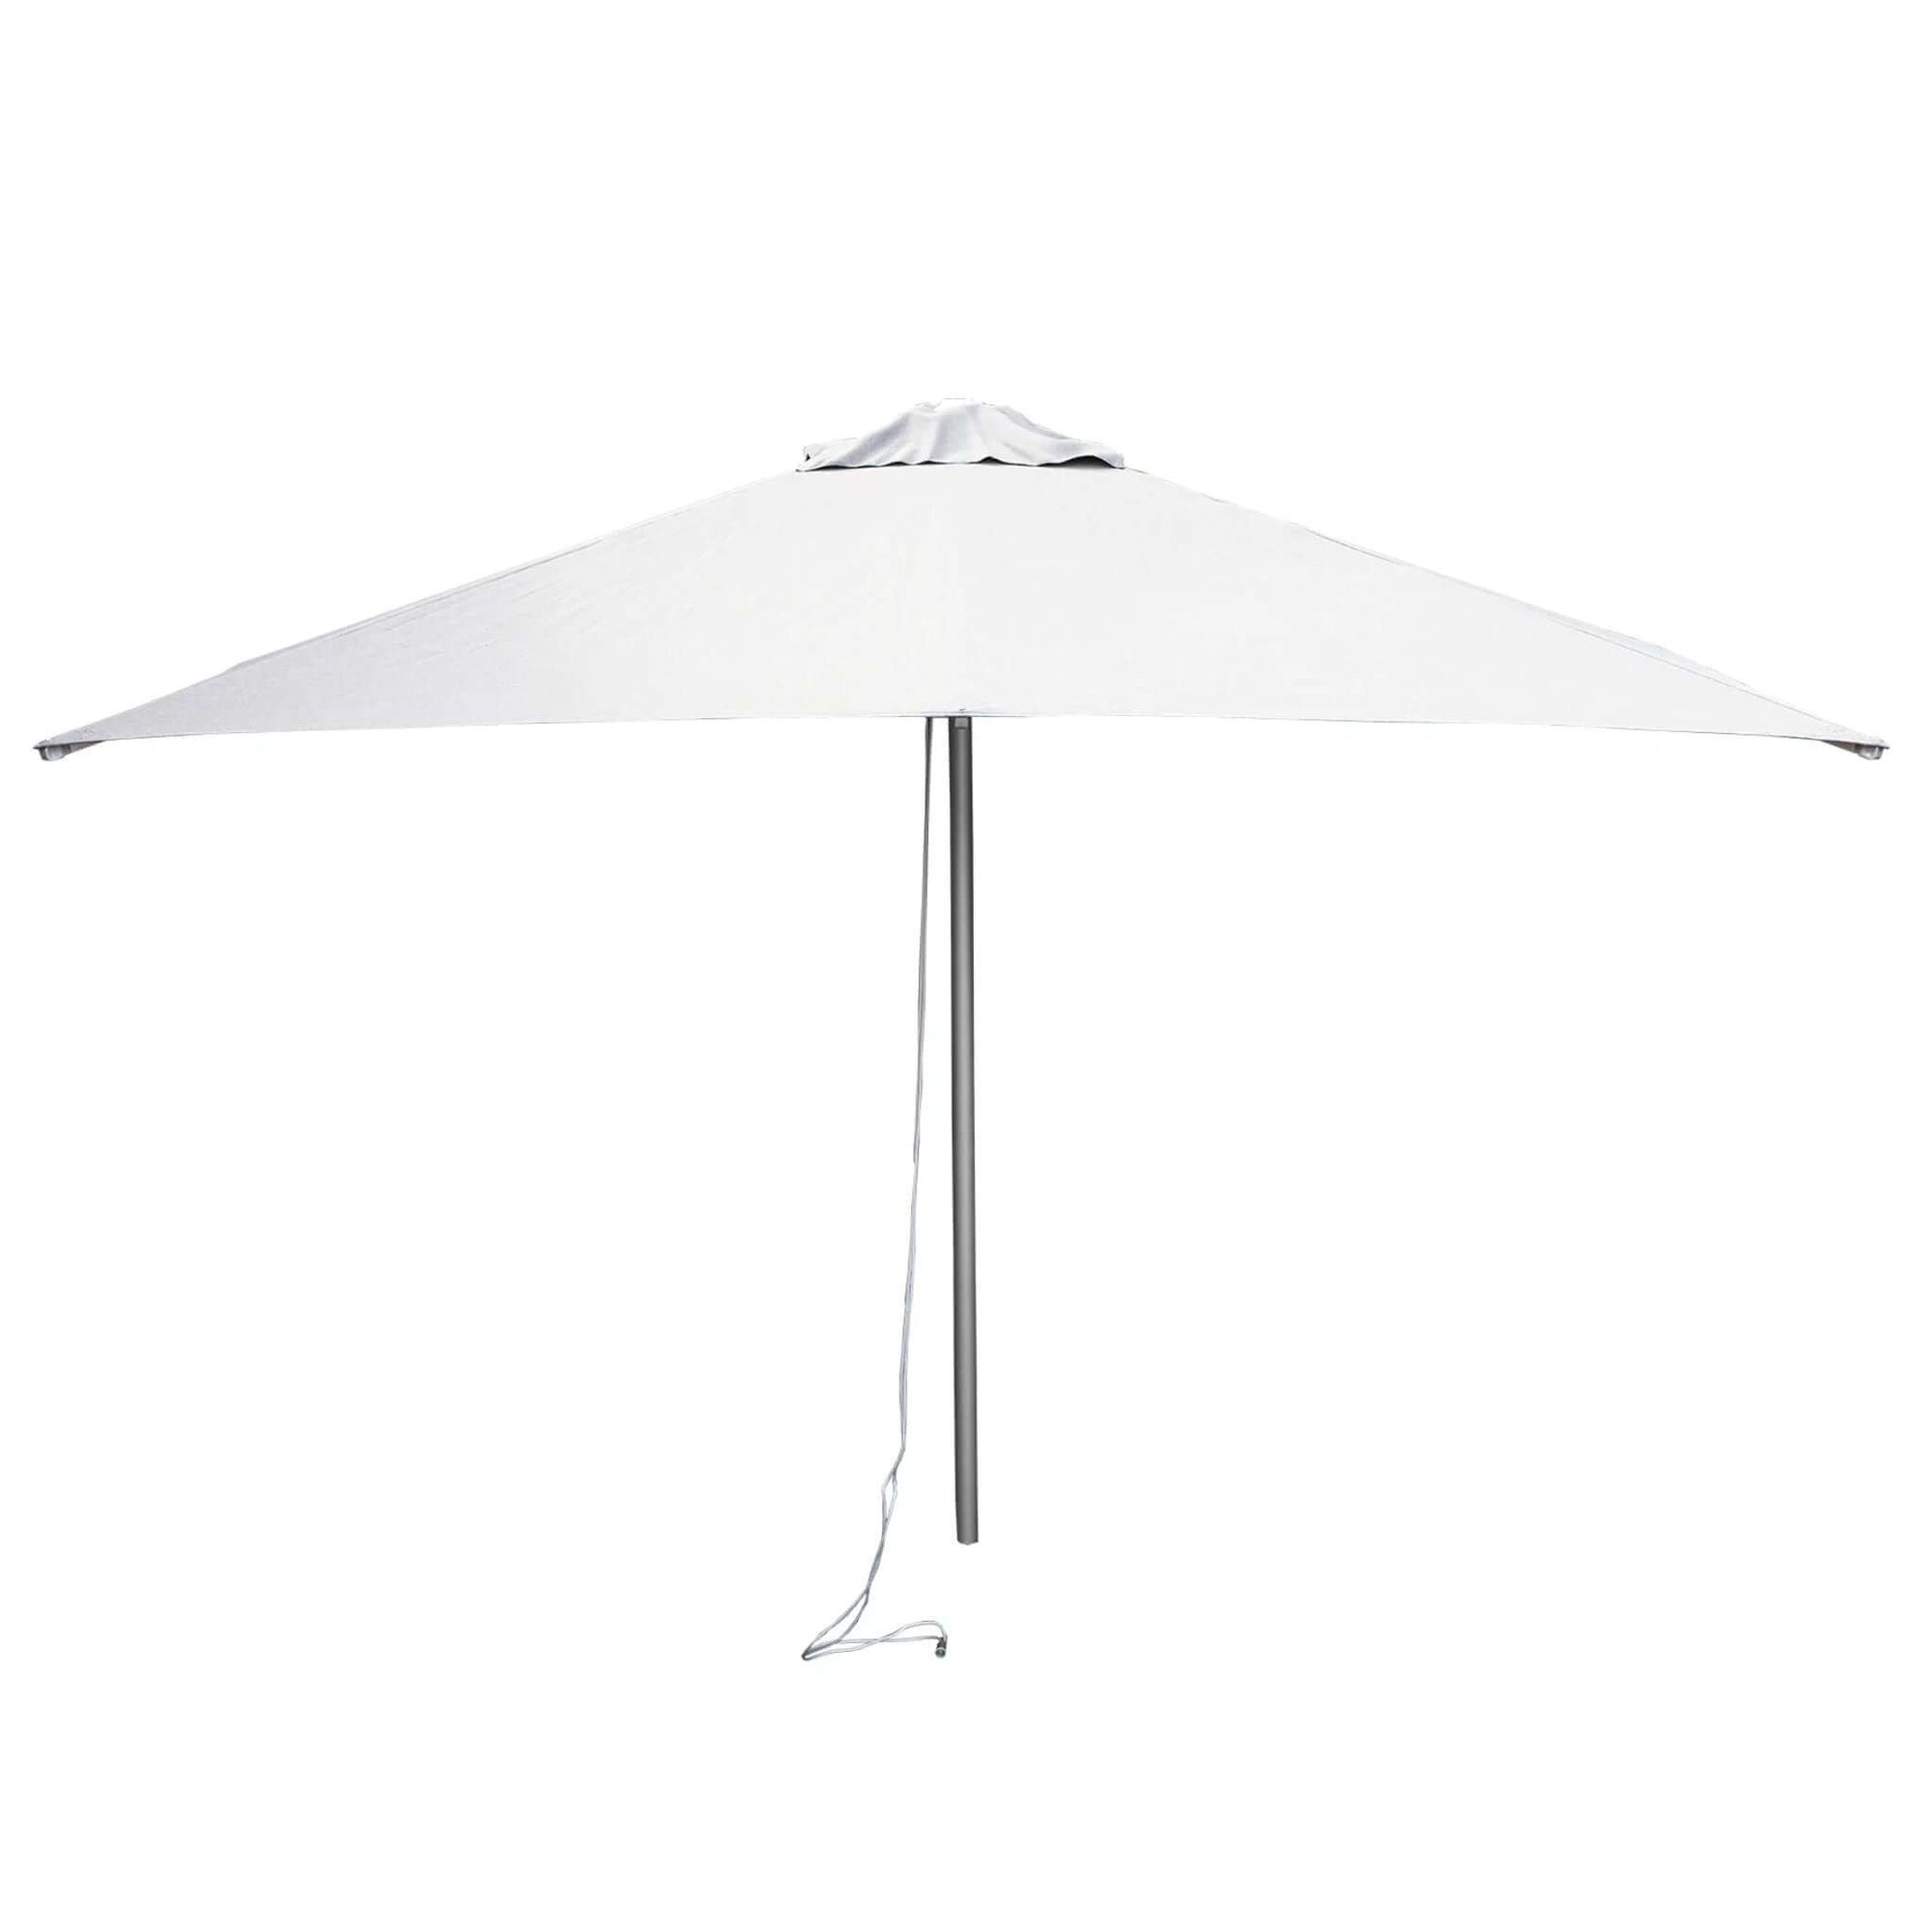 Cane-Line Harbour Parasol W/Pulley System, 3X3 M-Aluminium w/Dusty white fabric